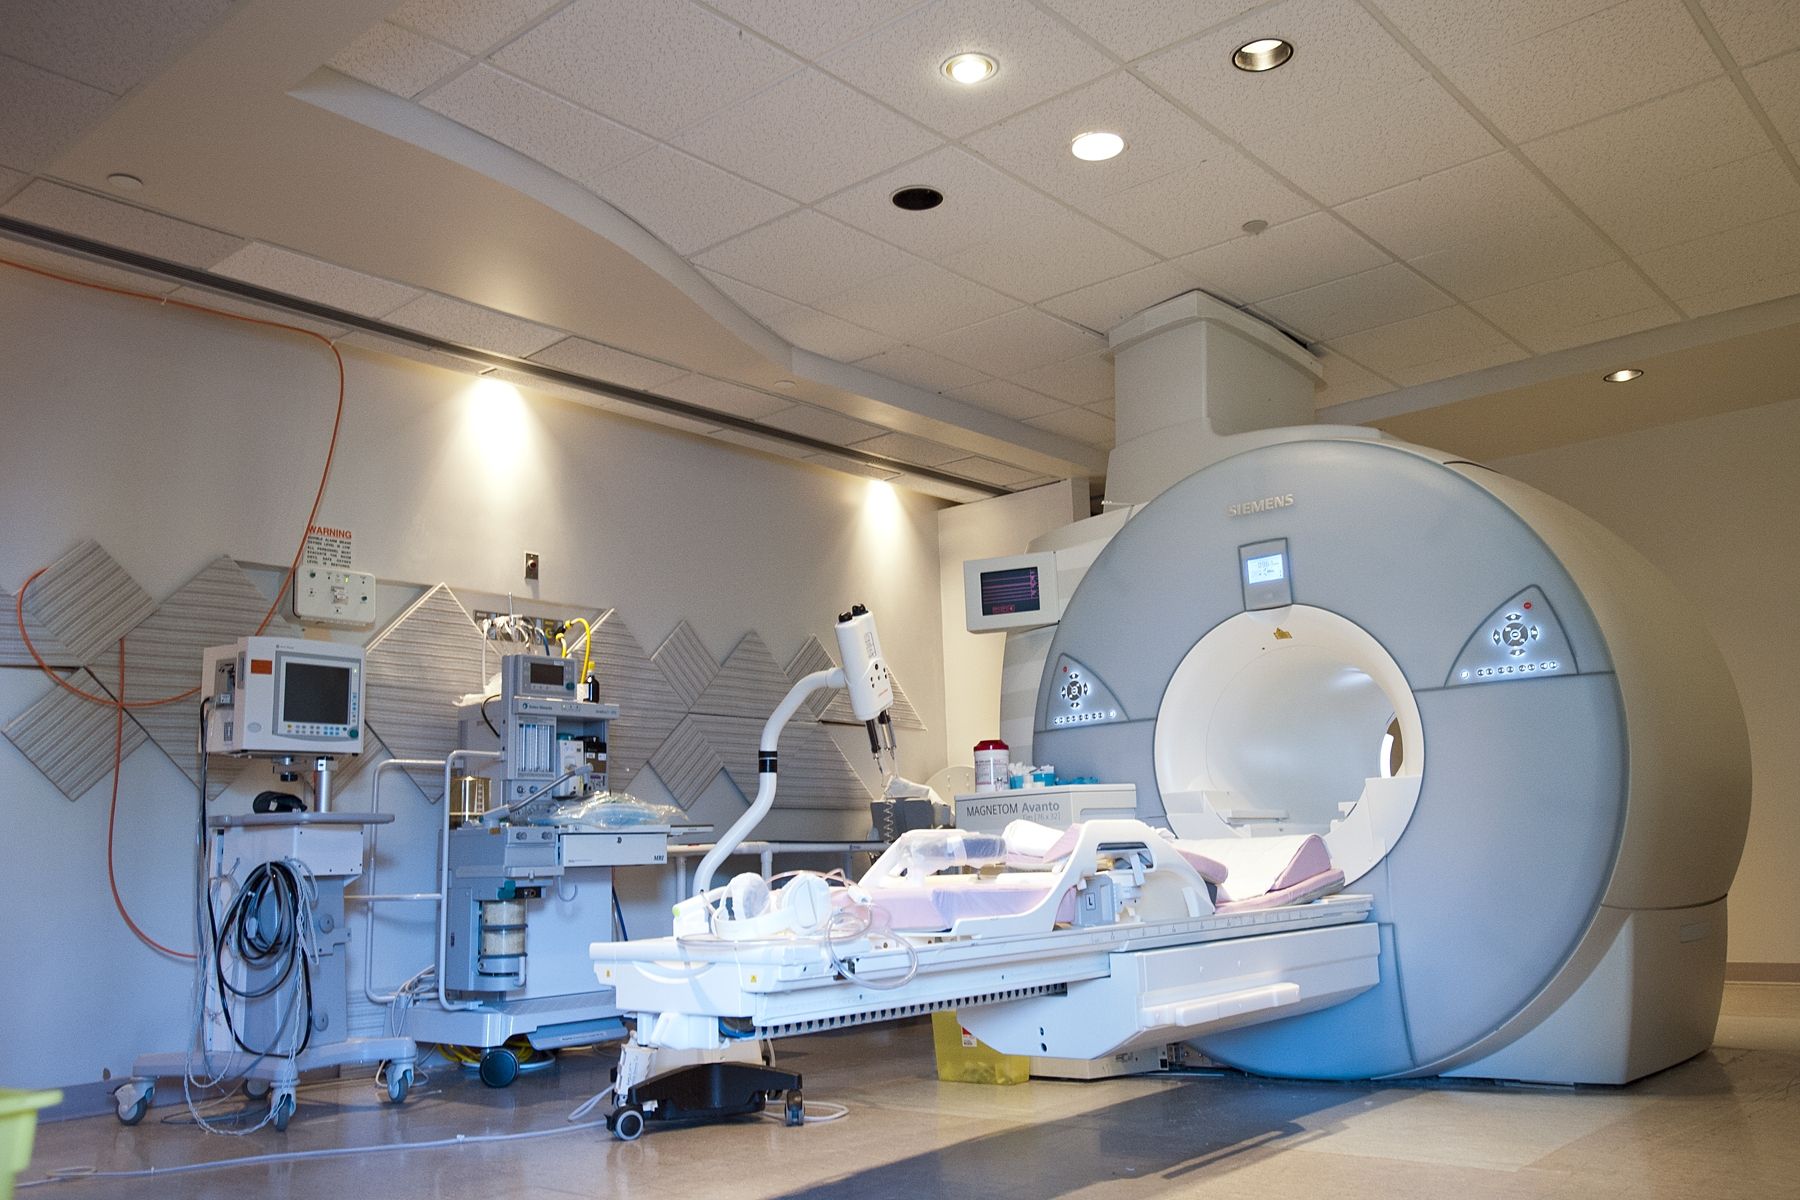 The current MRI scanner at the KGH site